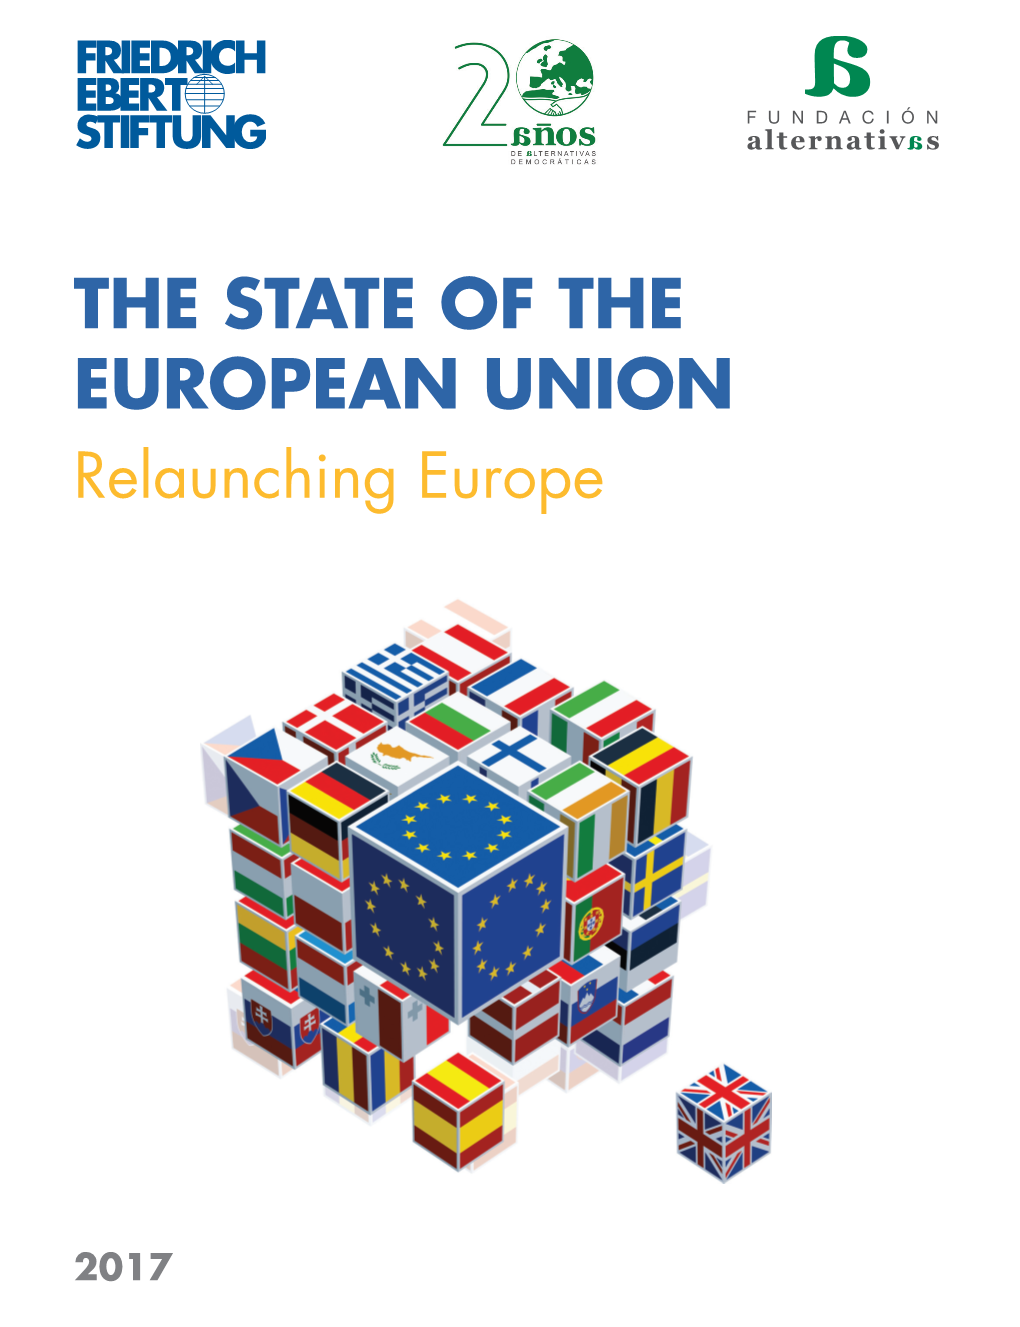 The State of the European Union 2013